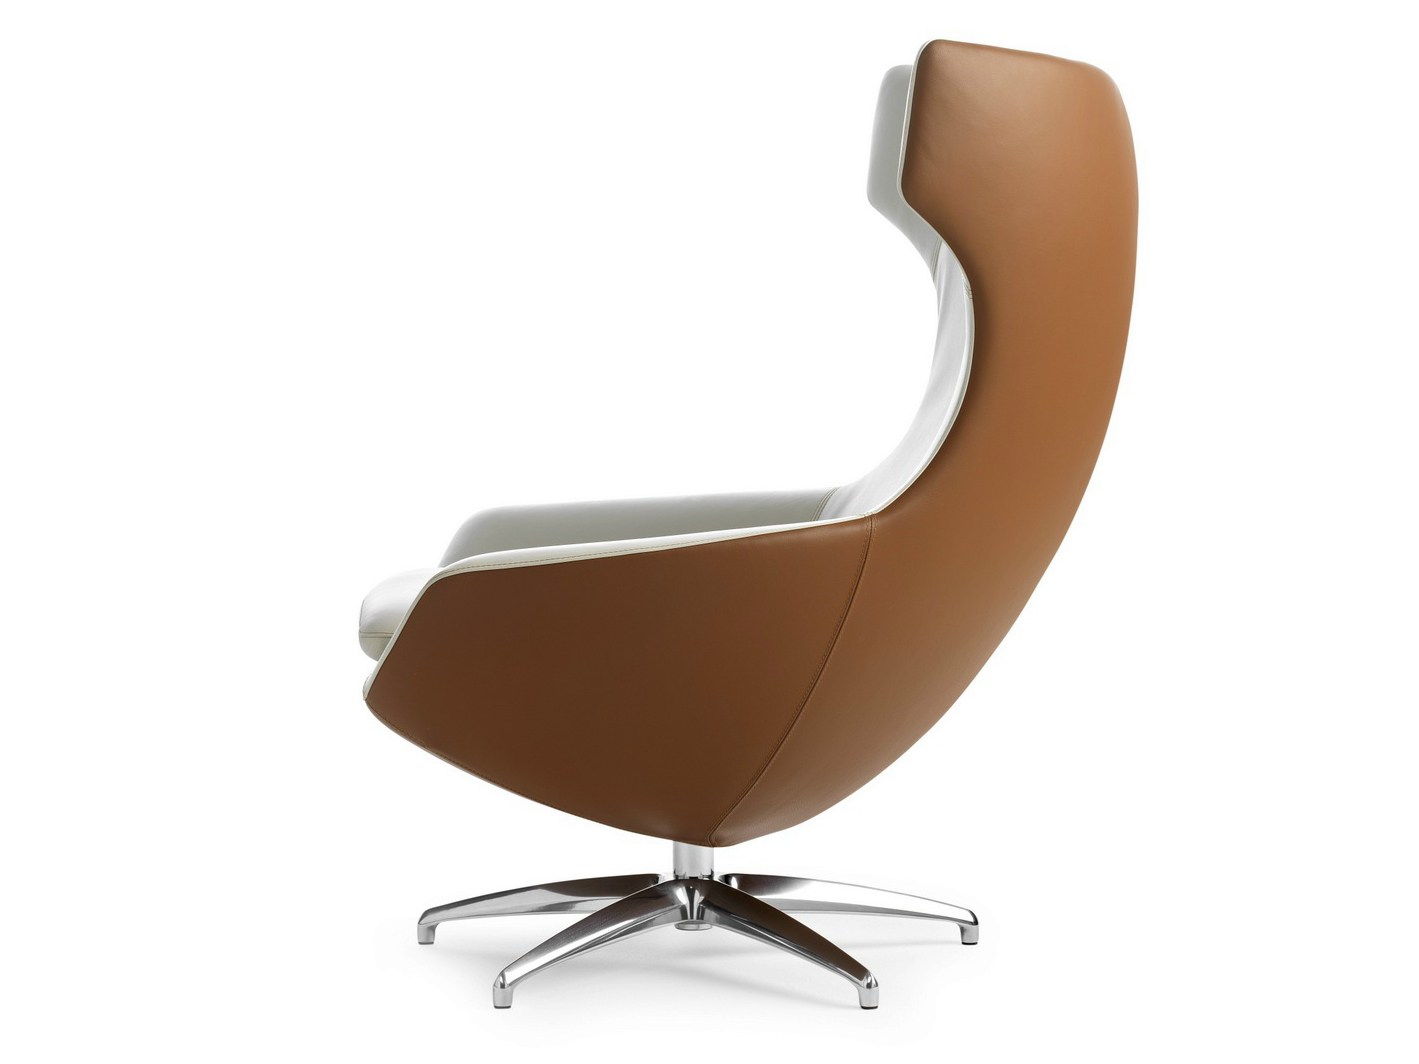 Caruzzo Lounge Chair by Frans Schrofer for Leolux